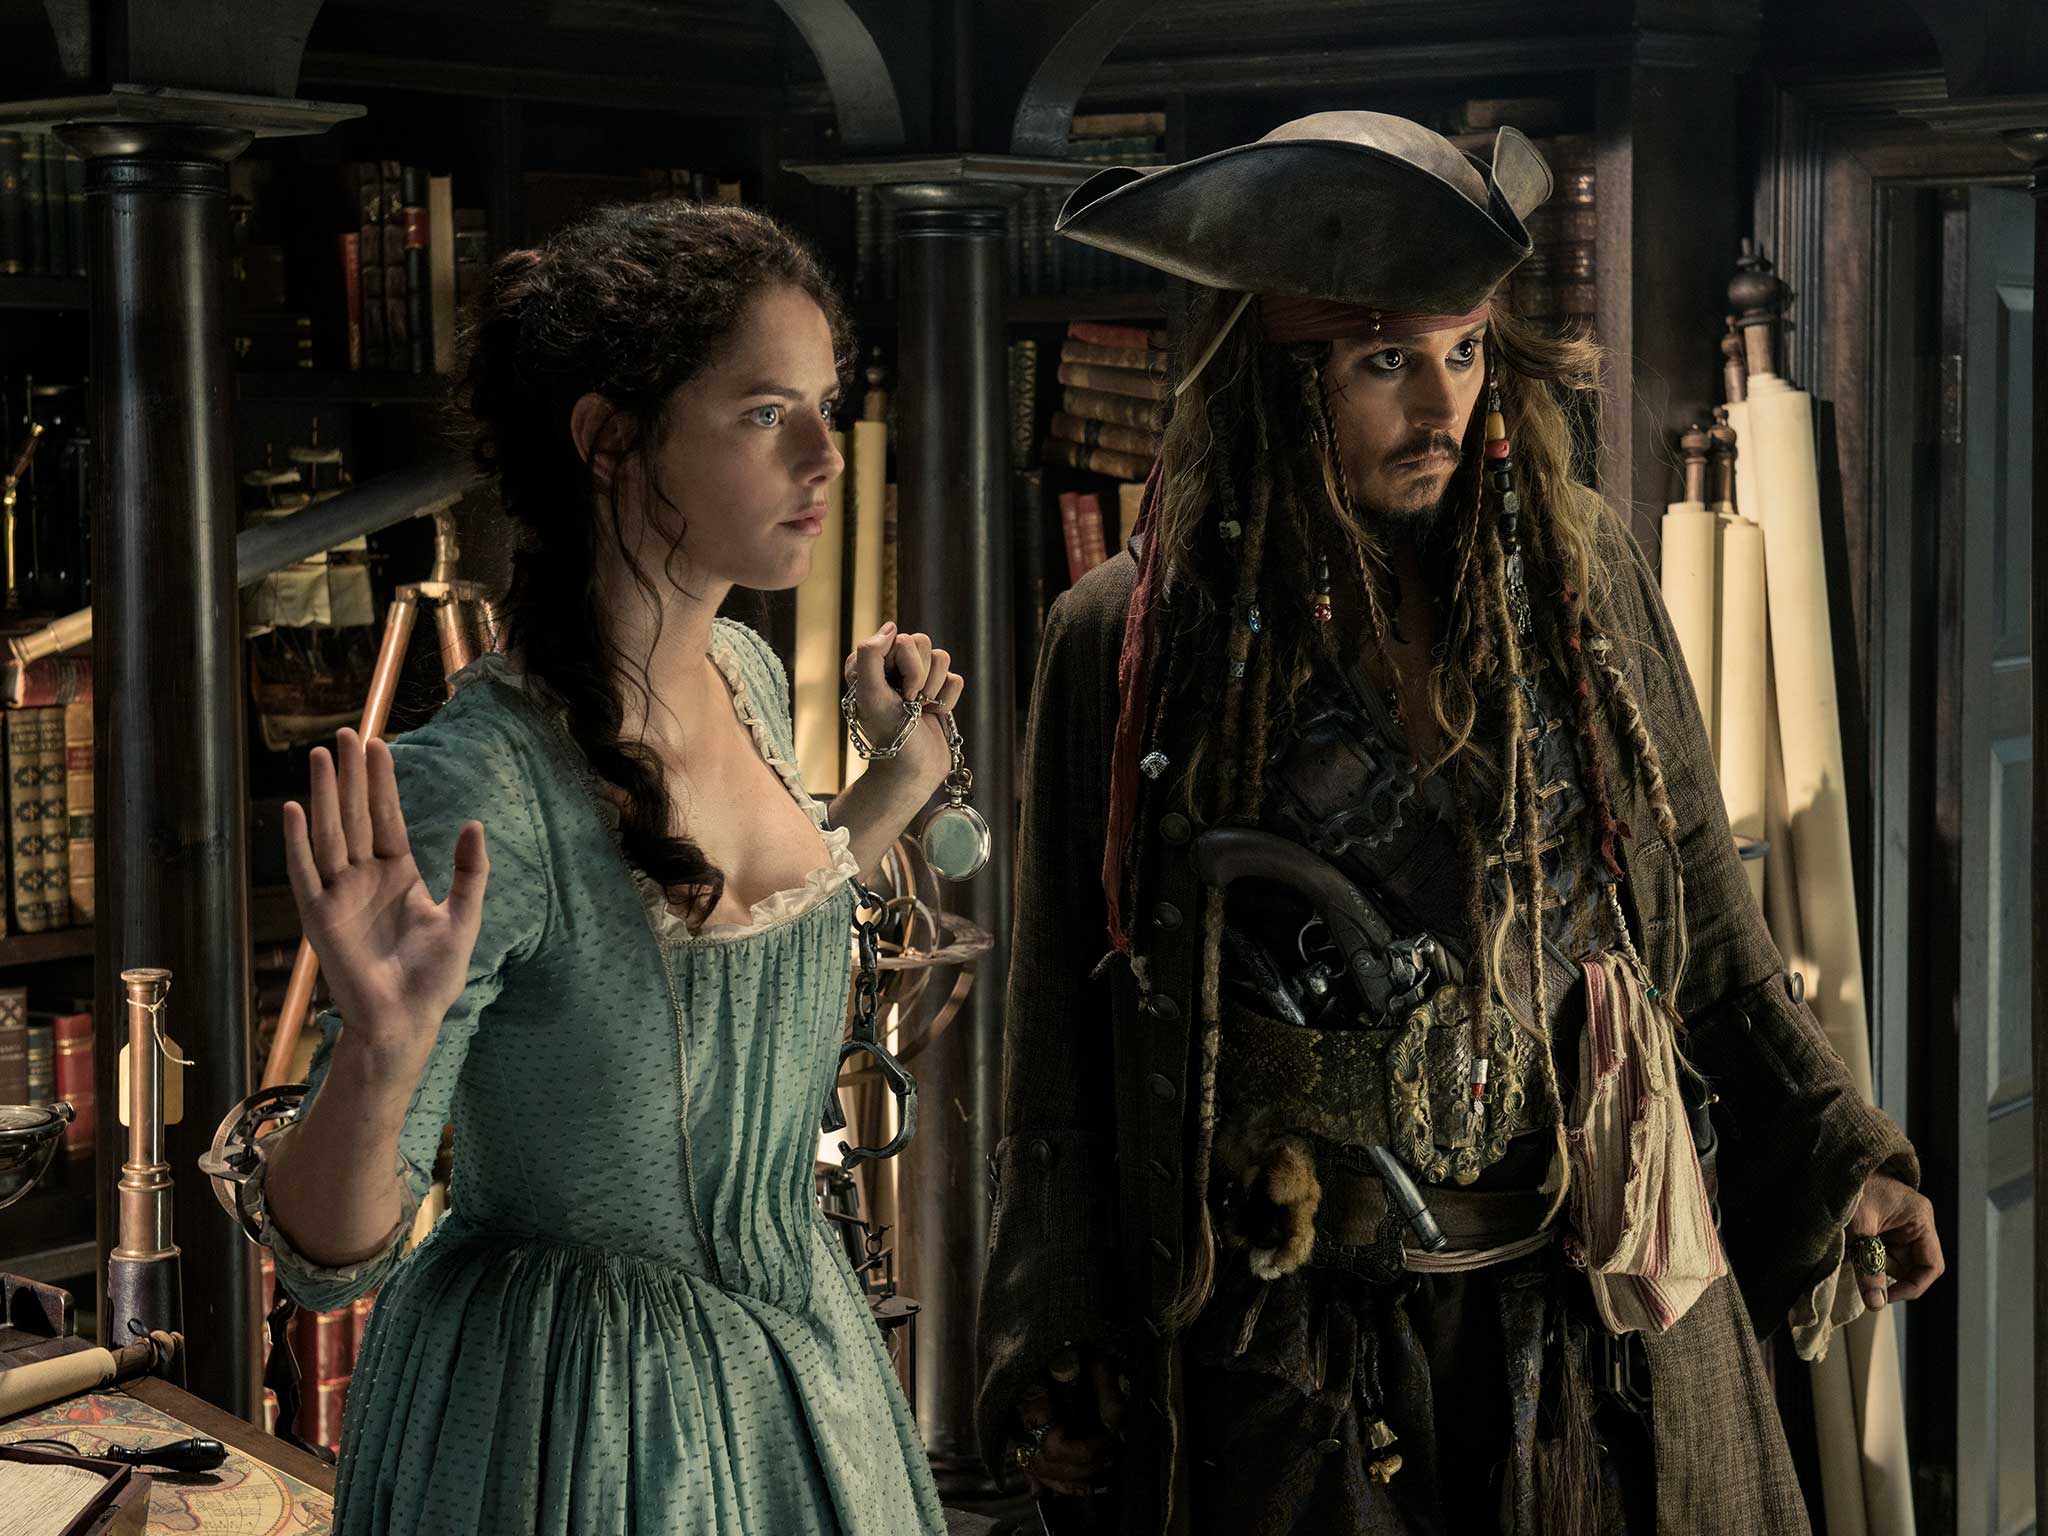 pirates of the caribbean 5 free online no